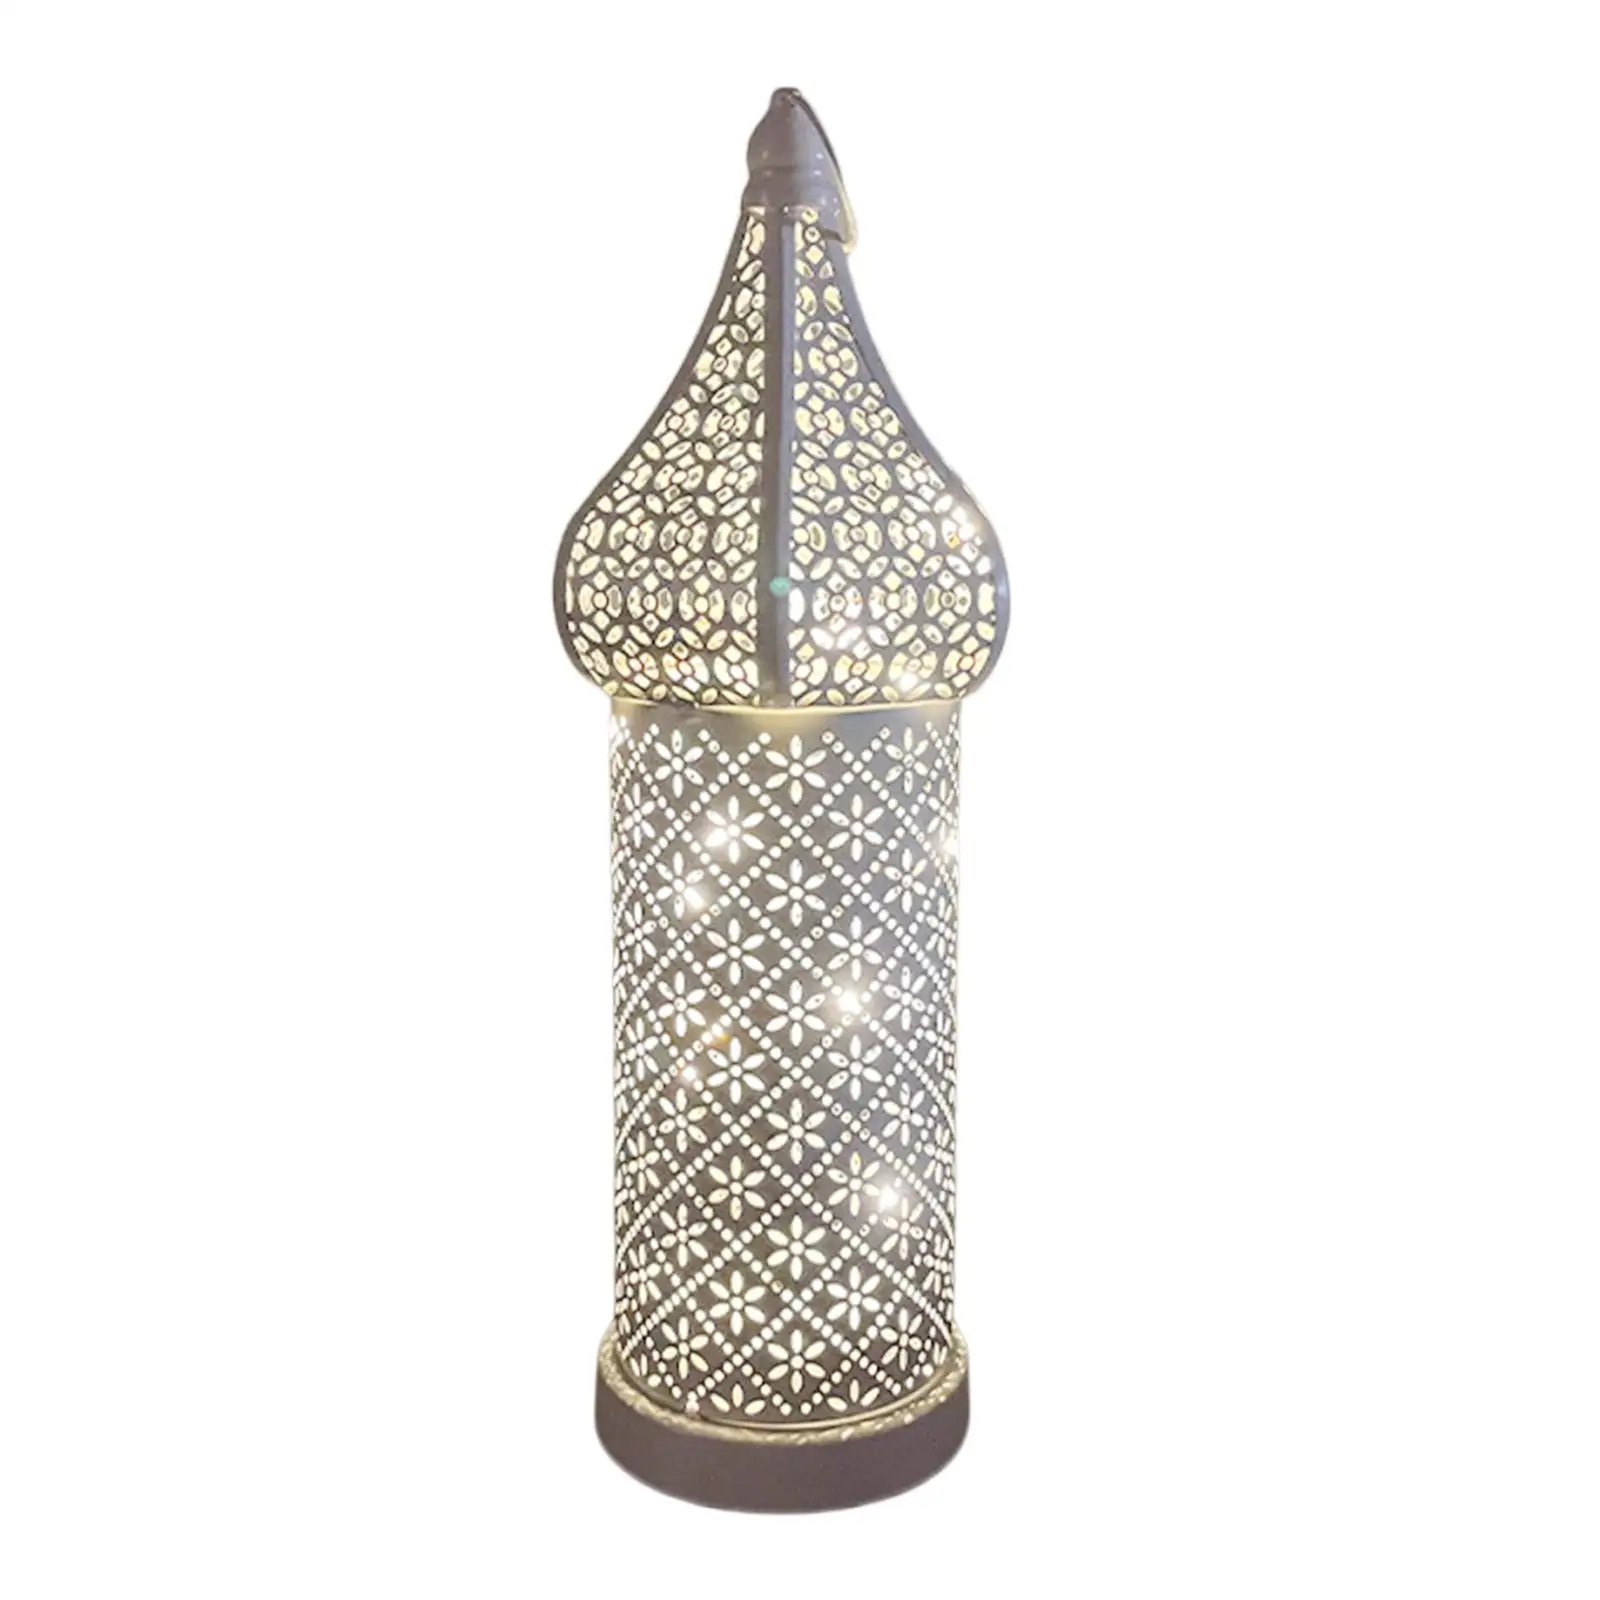  Lamp, Battery Operated Decor Lamps, Iron  Props,  Lantern Light, Fairy Lights for Wedding Bedroom Fireplace Indoor Home